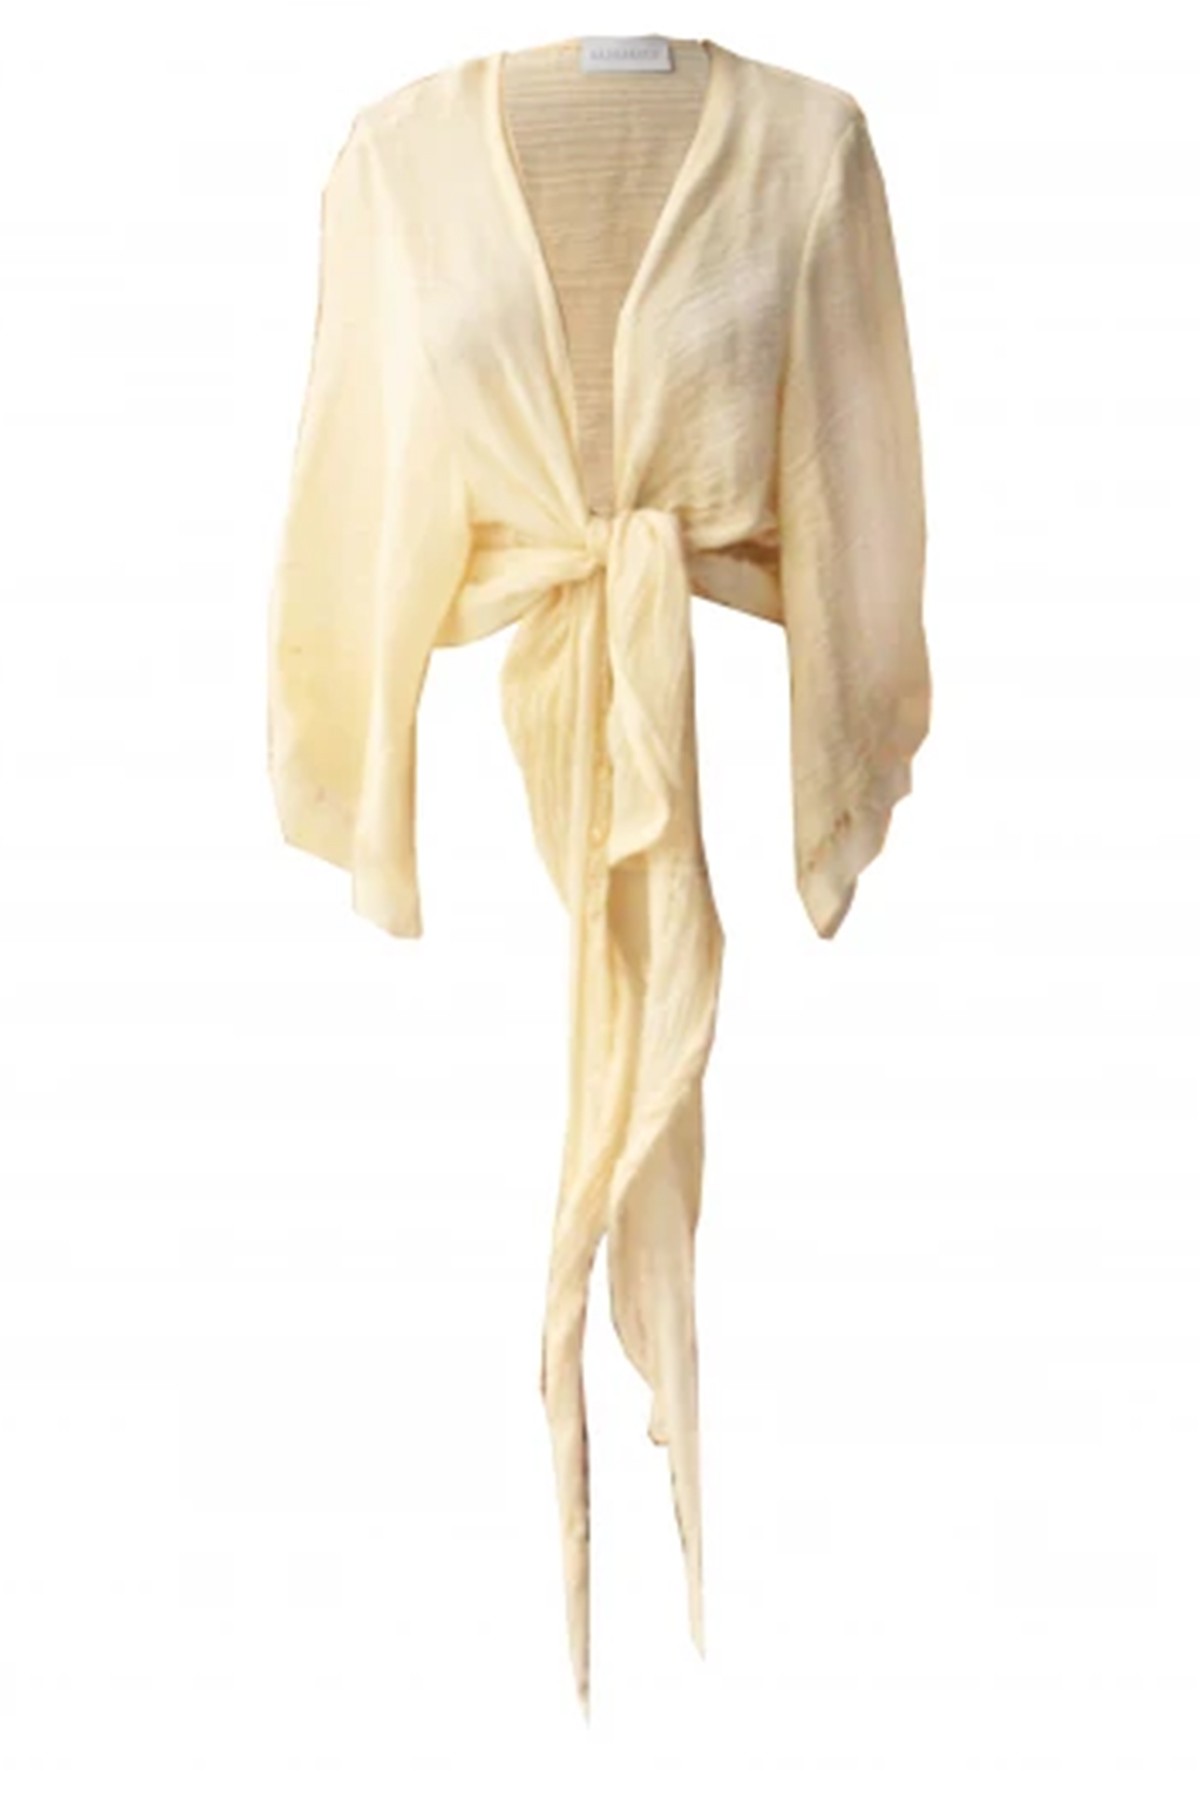 Sand Touch Blouse - Hand-Woven Buldan Cloth Tied Blouse (Special Order-Custom Made)